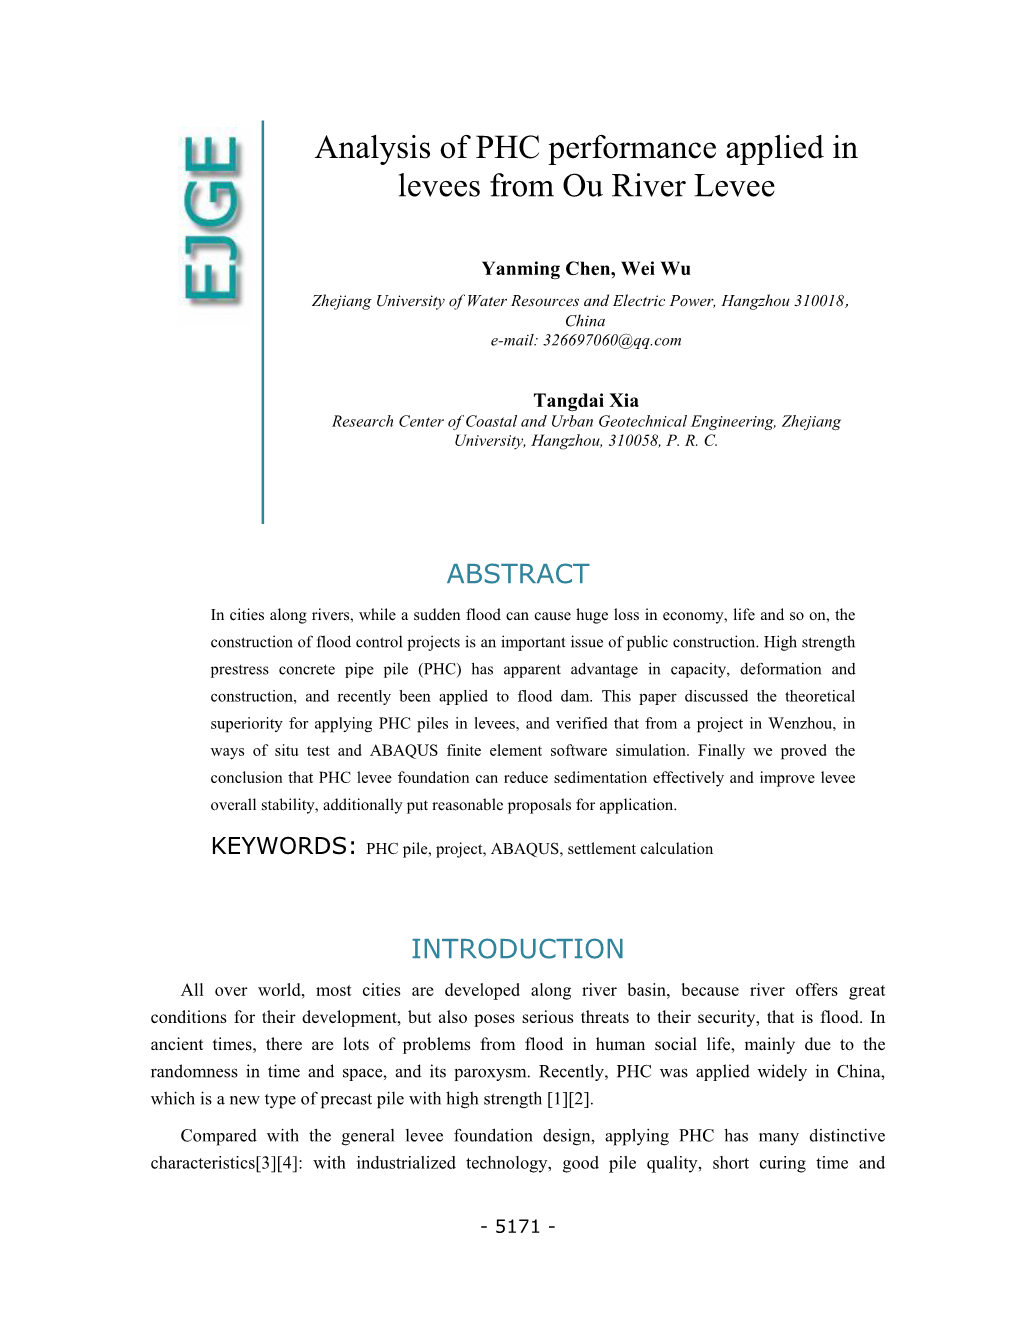 Analysis of PHC Performance Applied in Levees from Ou River Levee